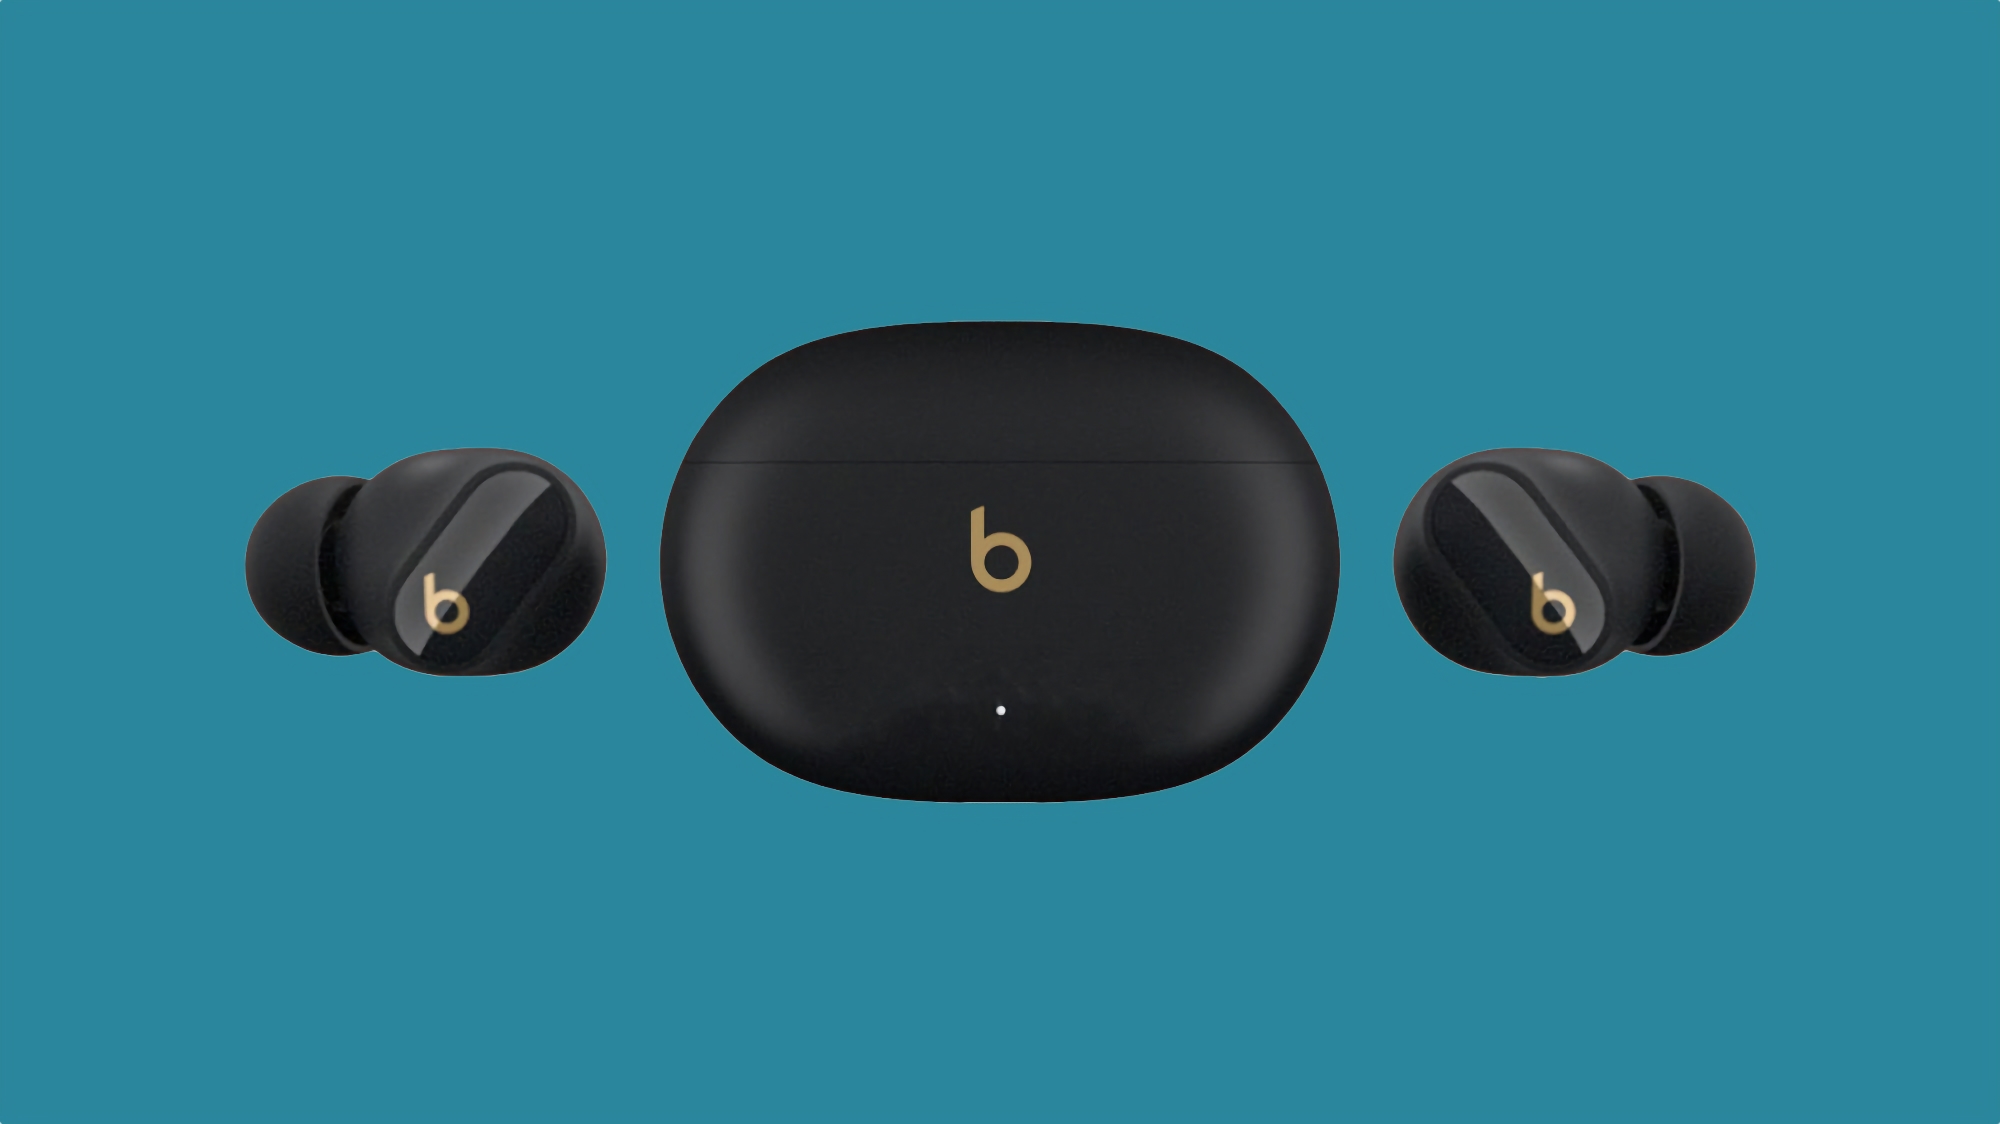 Here's what the Beats Studio Buds+ will look like: Apple's new TWS earphones with improved ANC and transparency mode